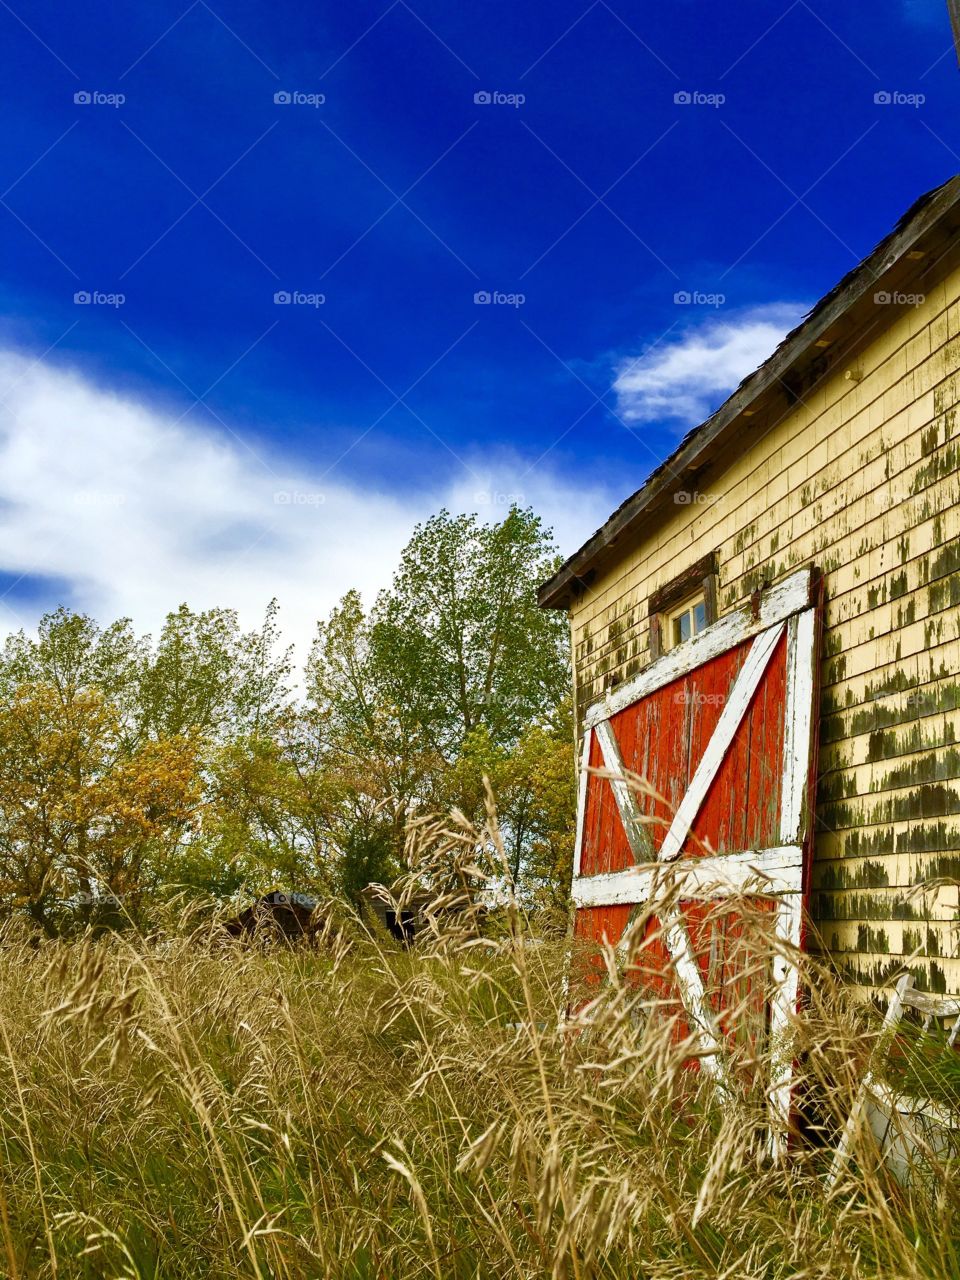 Abandoned rustic old house 